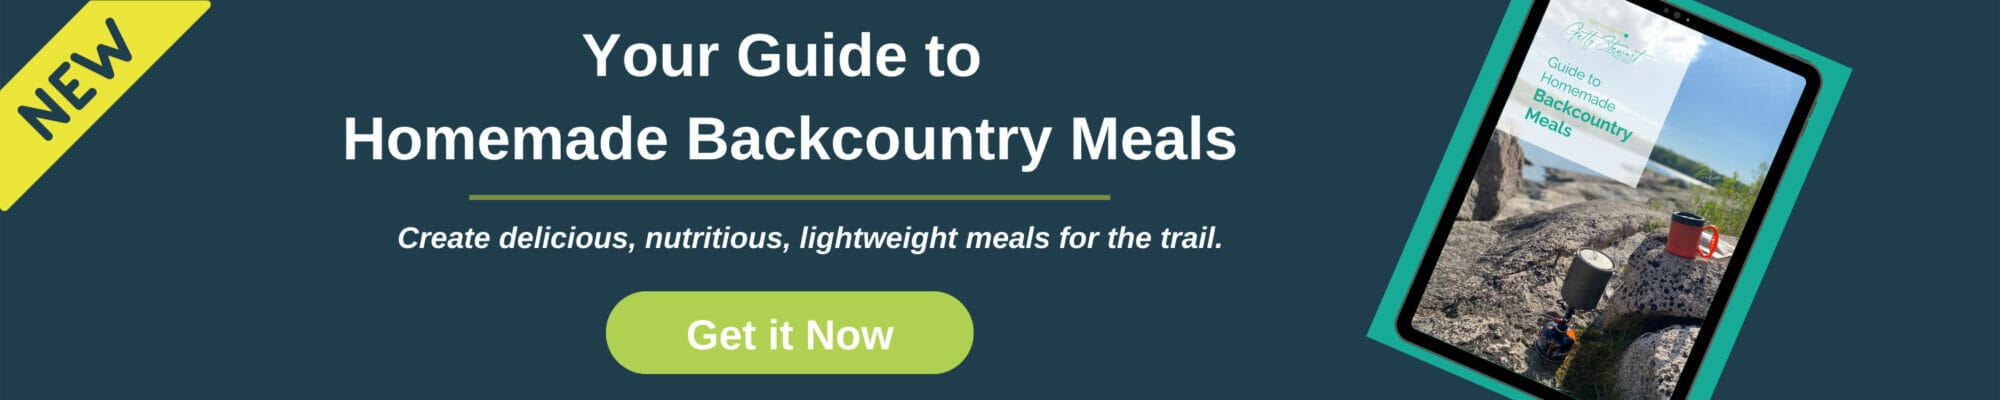 ad for new backcountry meals guide